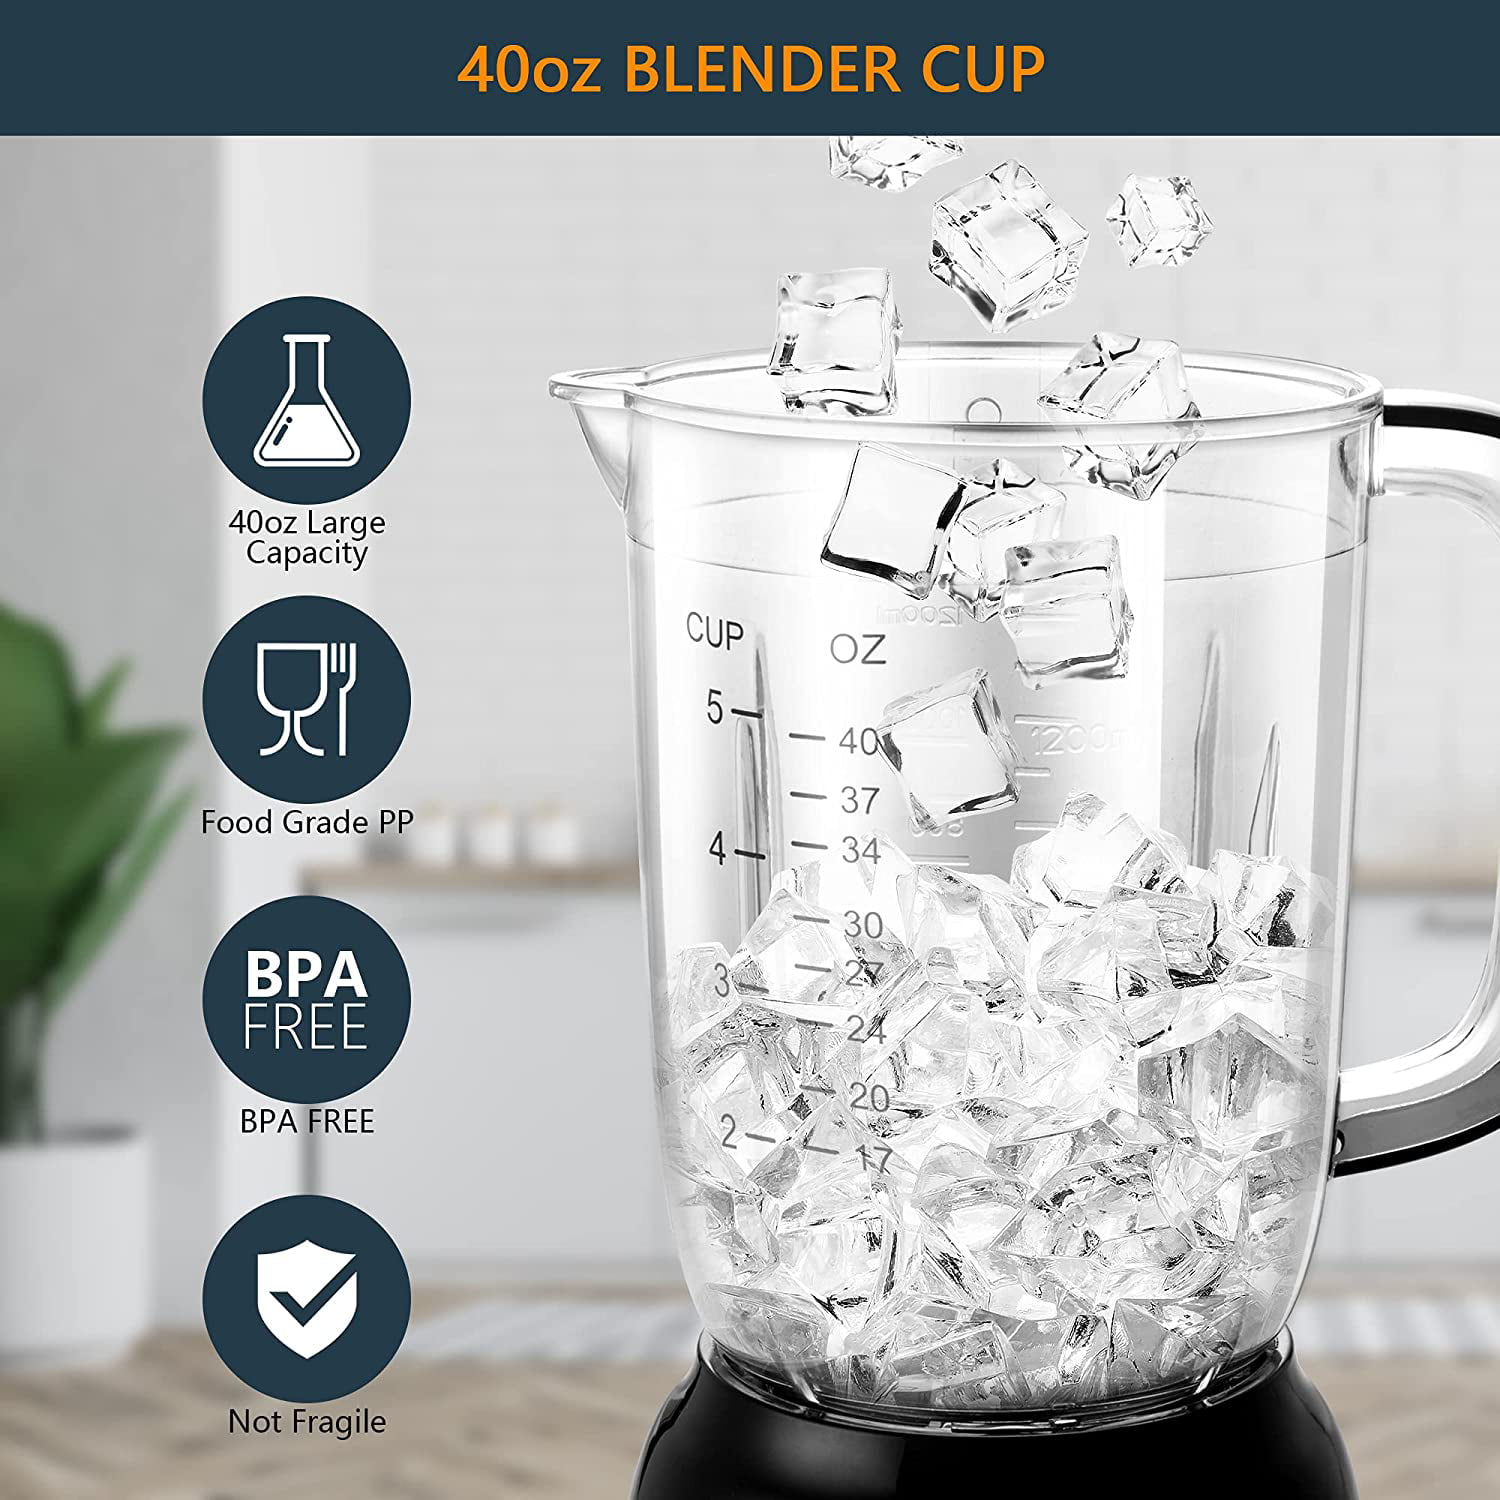 Bear 700W 3 Speed Self-Cleaning Countertop Blender with 40oz